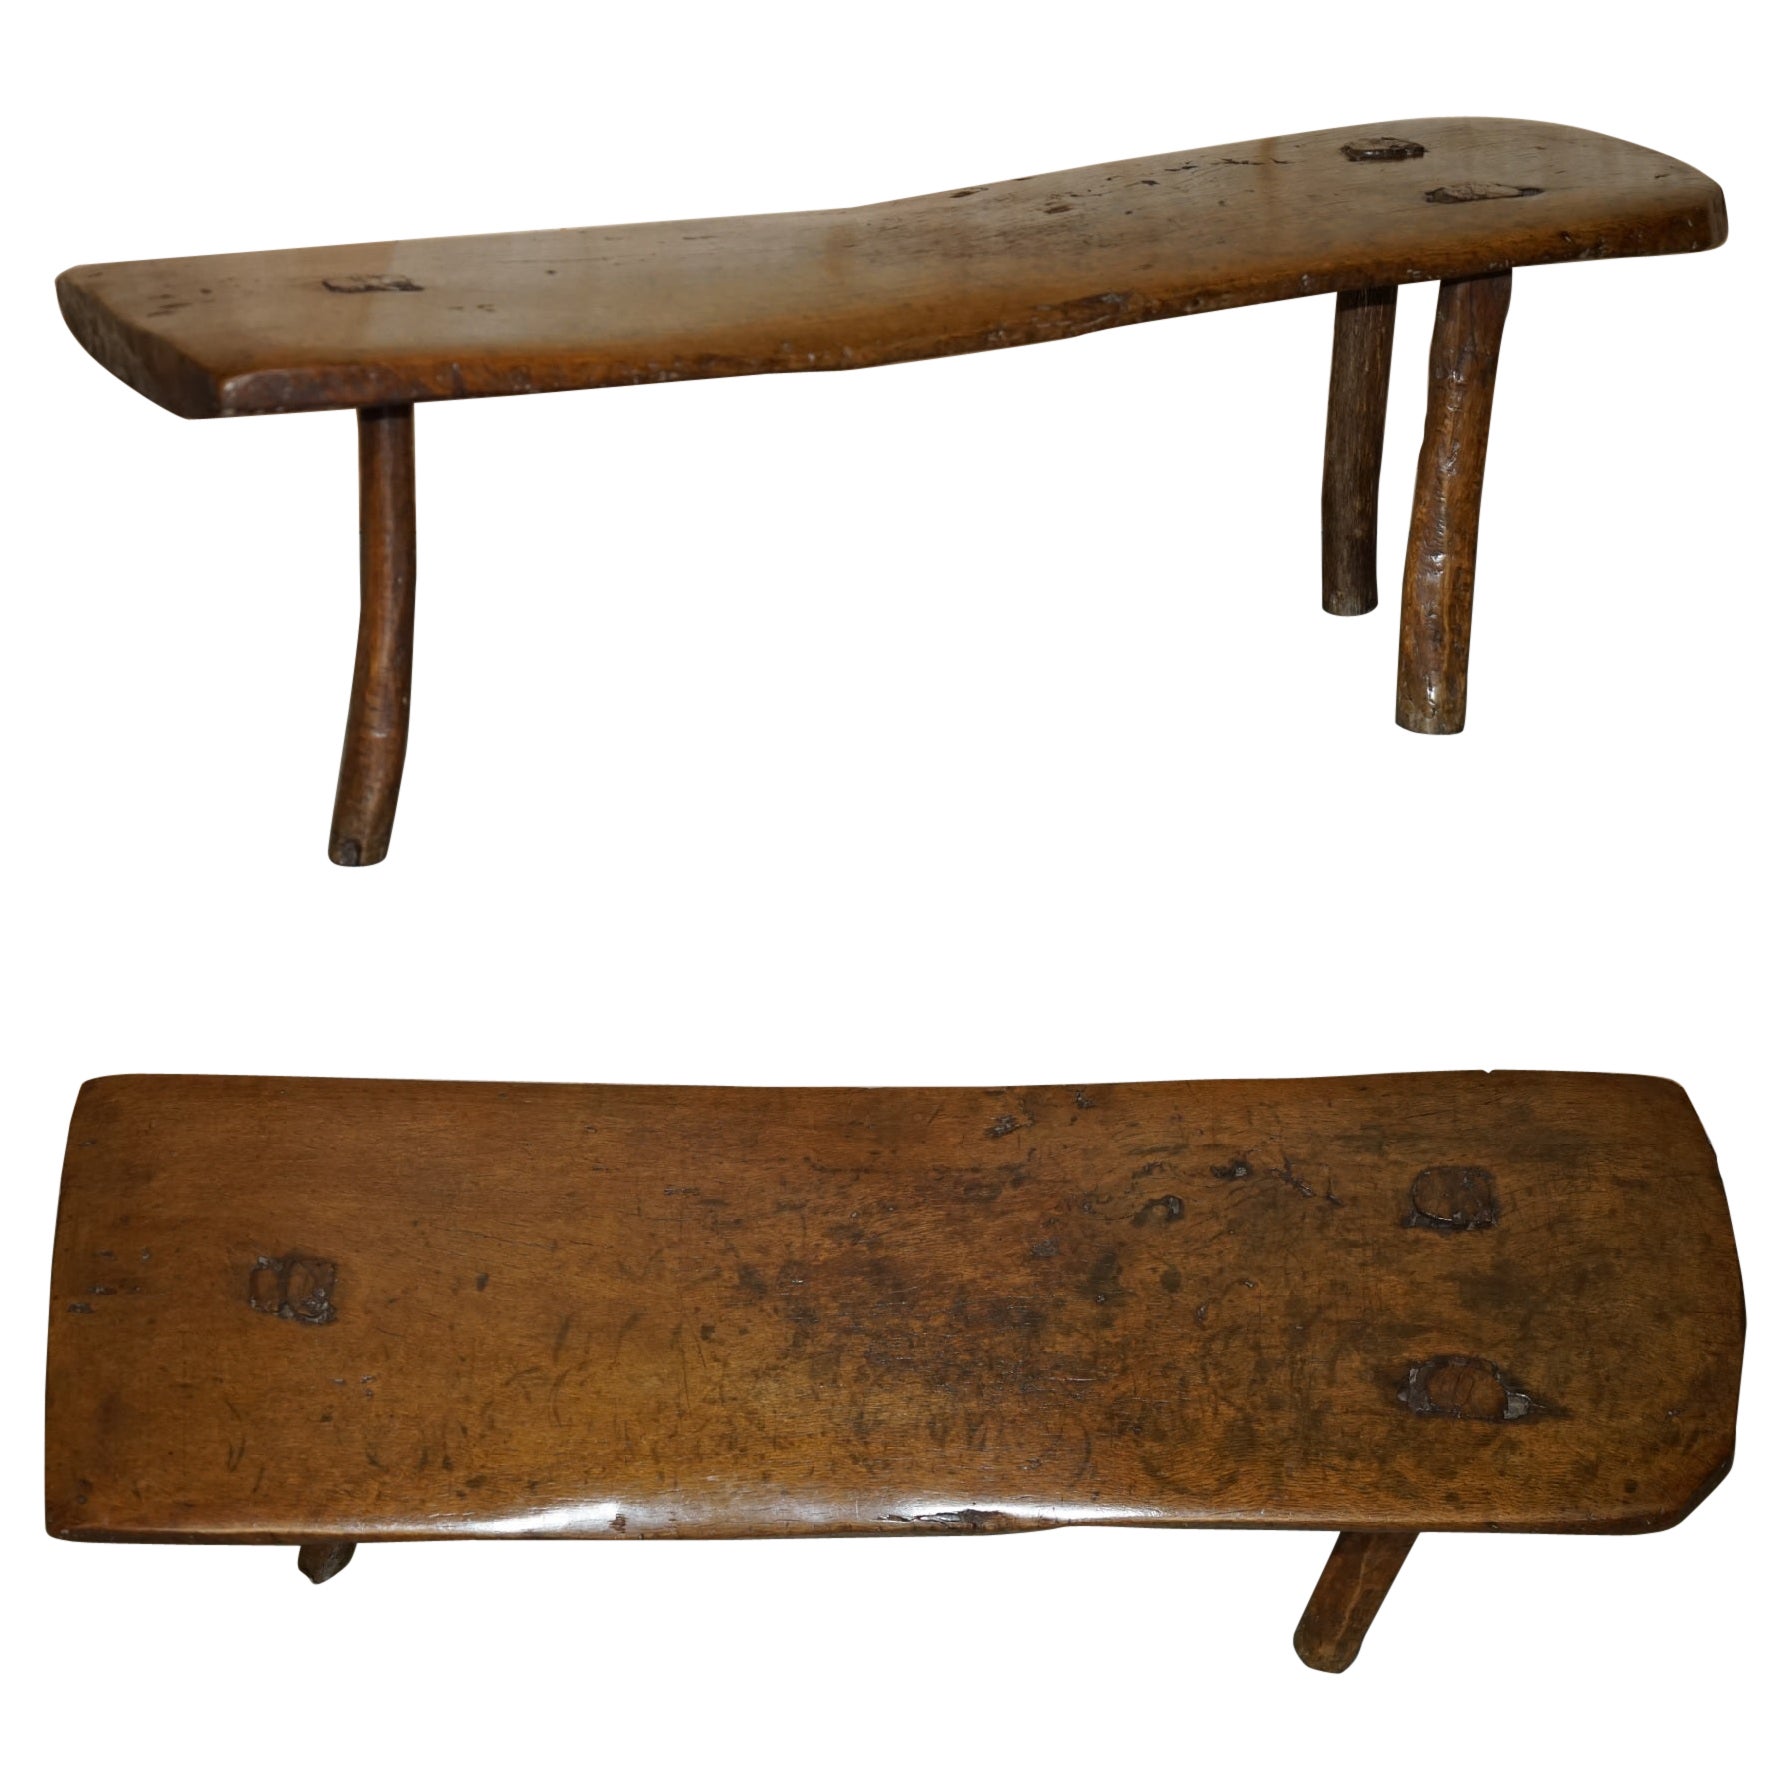 Primitive Antique 1740 Spanish 18th Century Three Legged Bench or Coffee Table For Sale